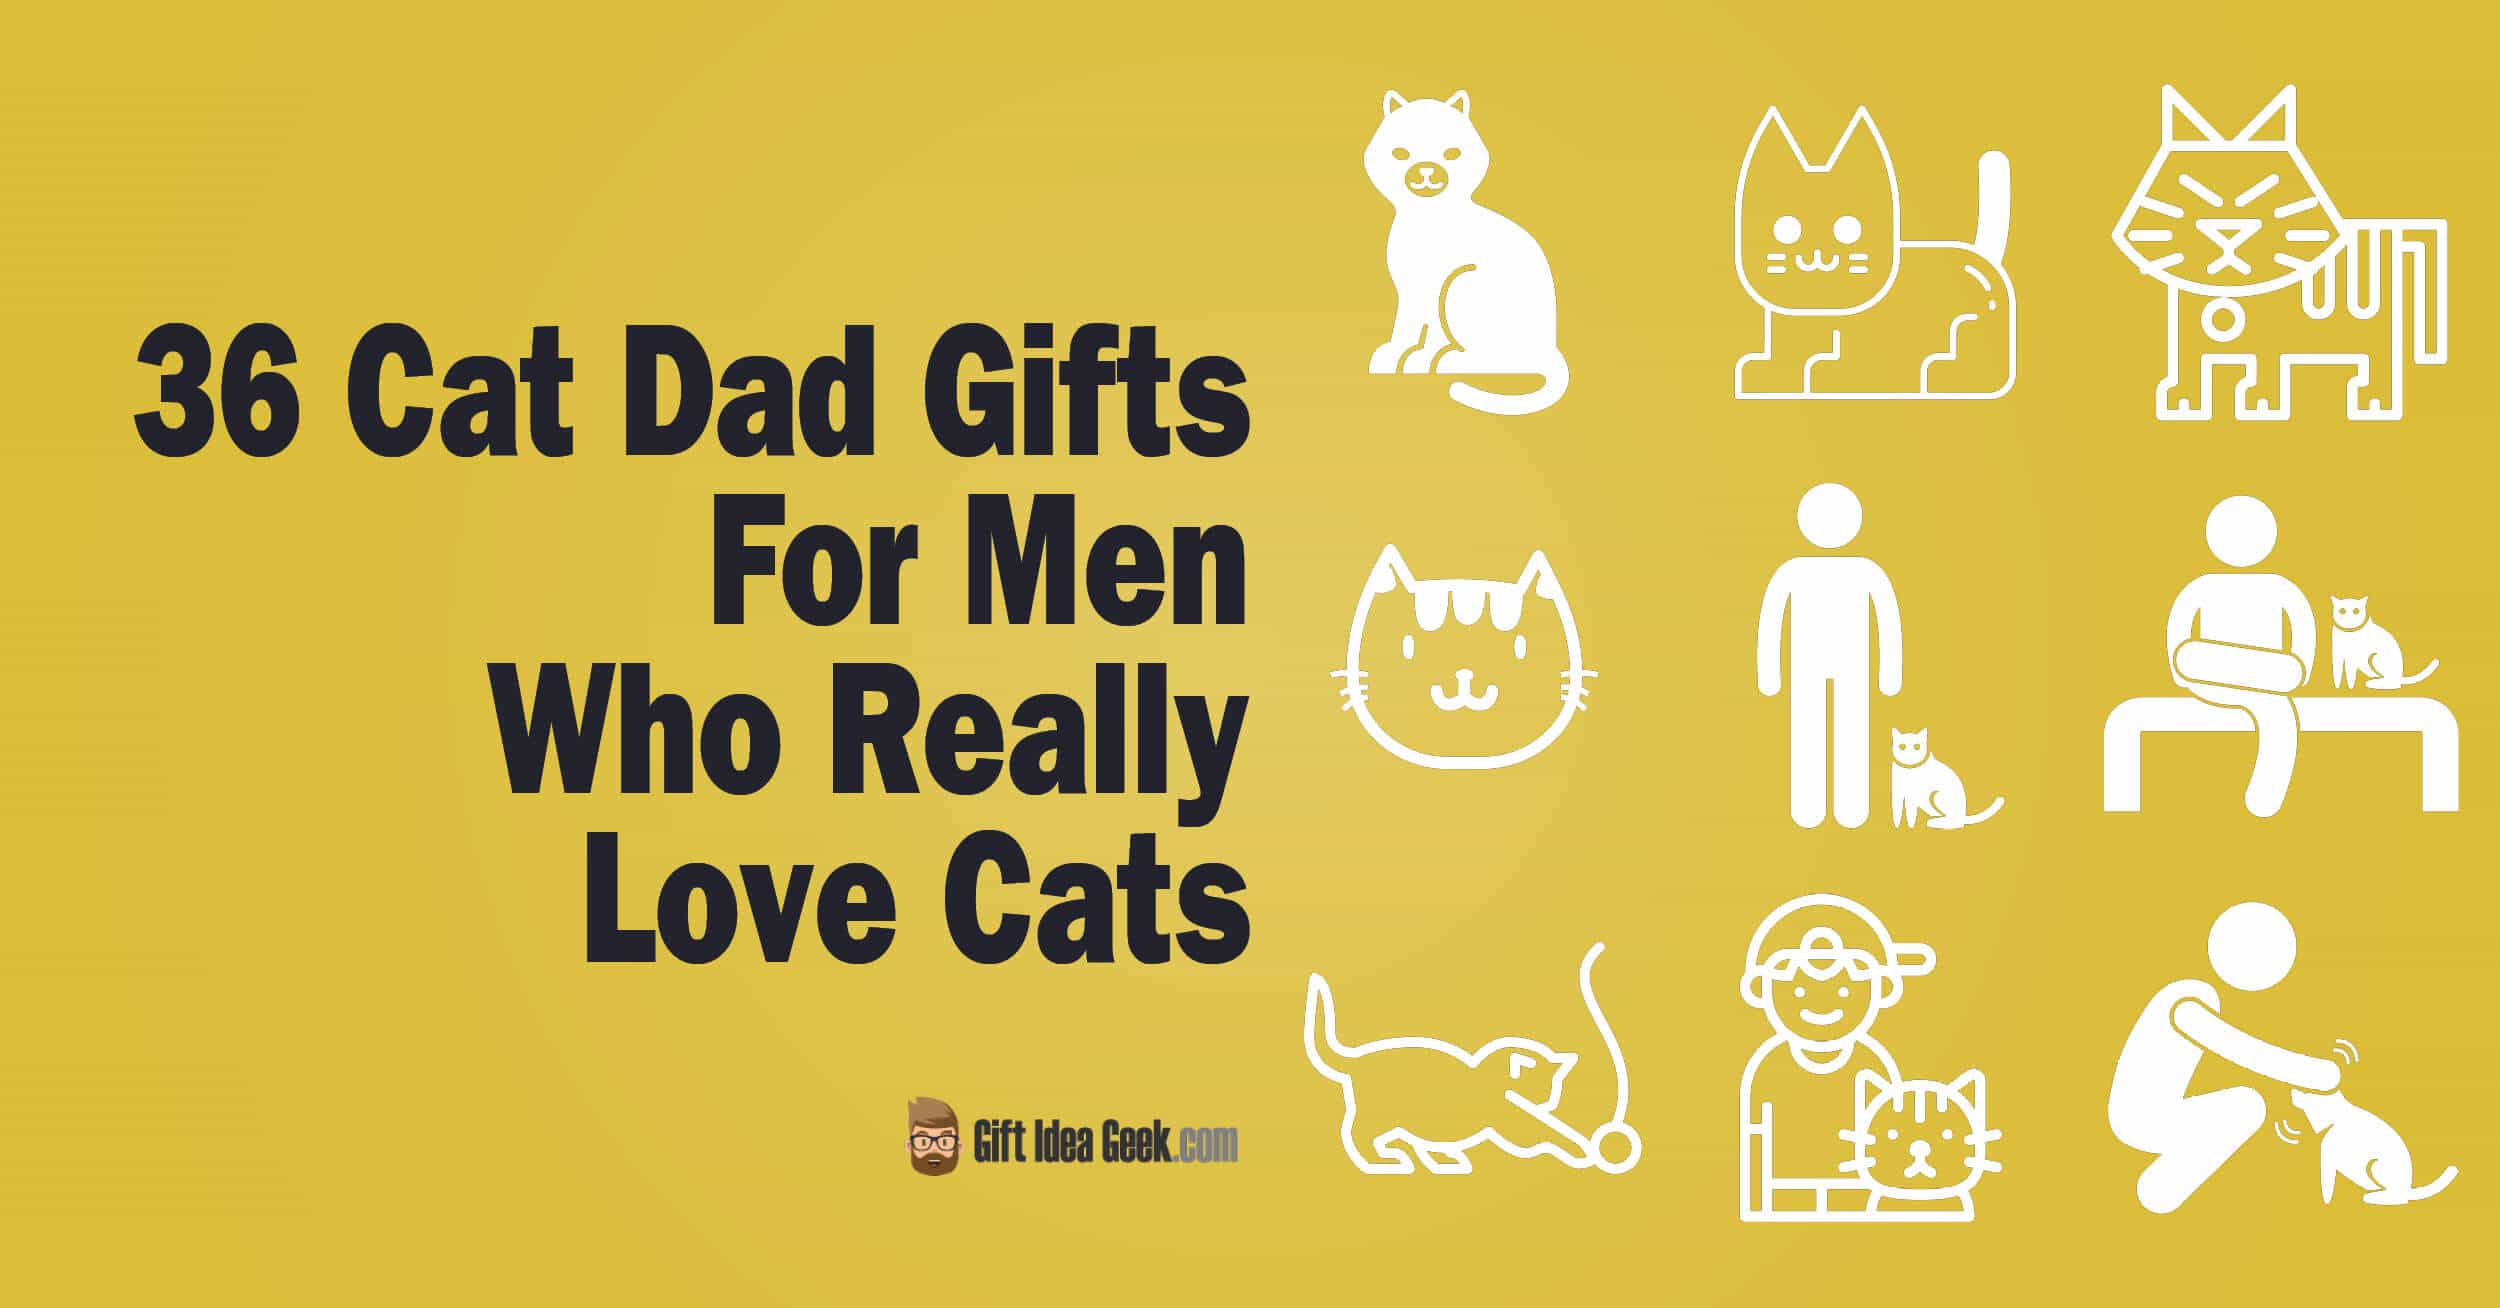 https://www.giftideageek.com/wp-content/uploads/2022/04/Cat-Dad-Gifts-Featured-Image.jpg